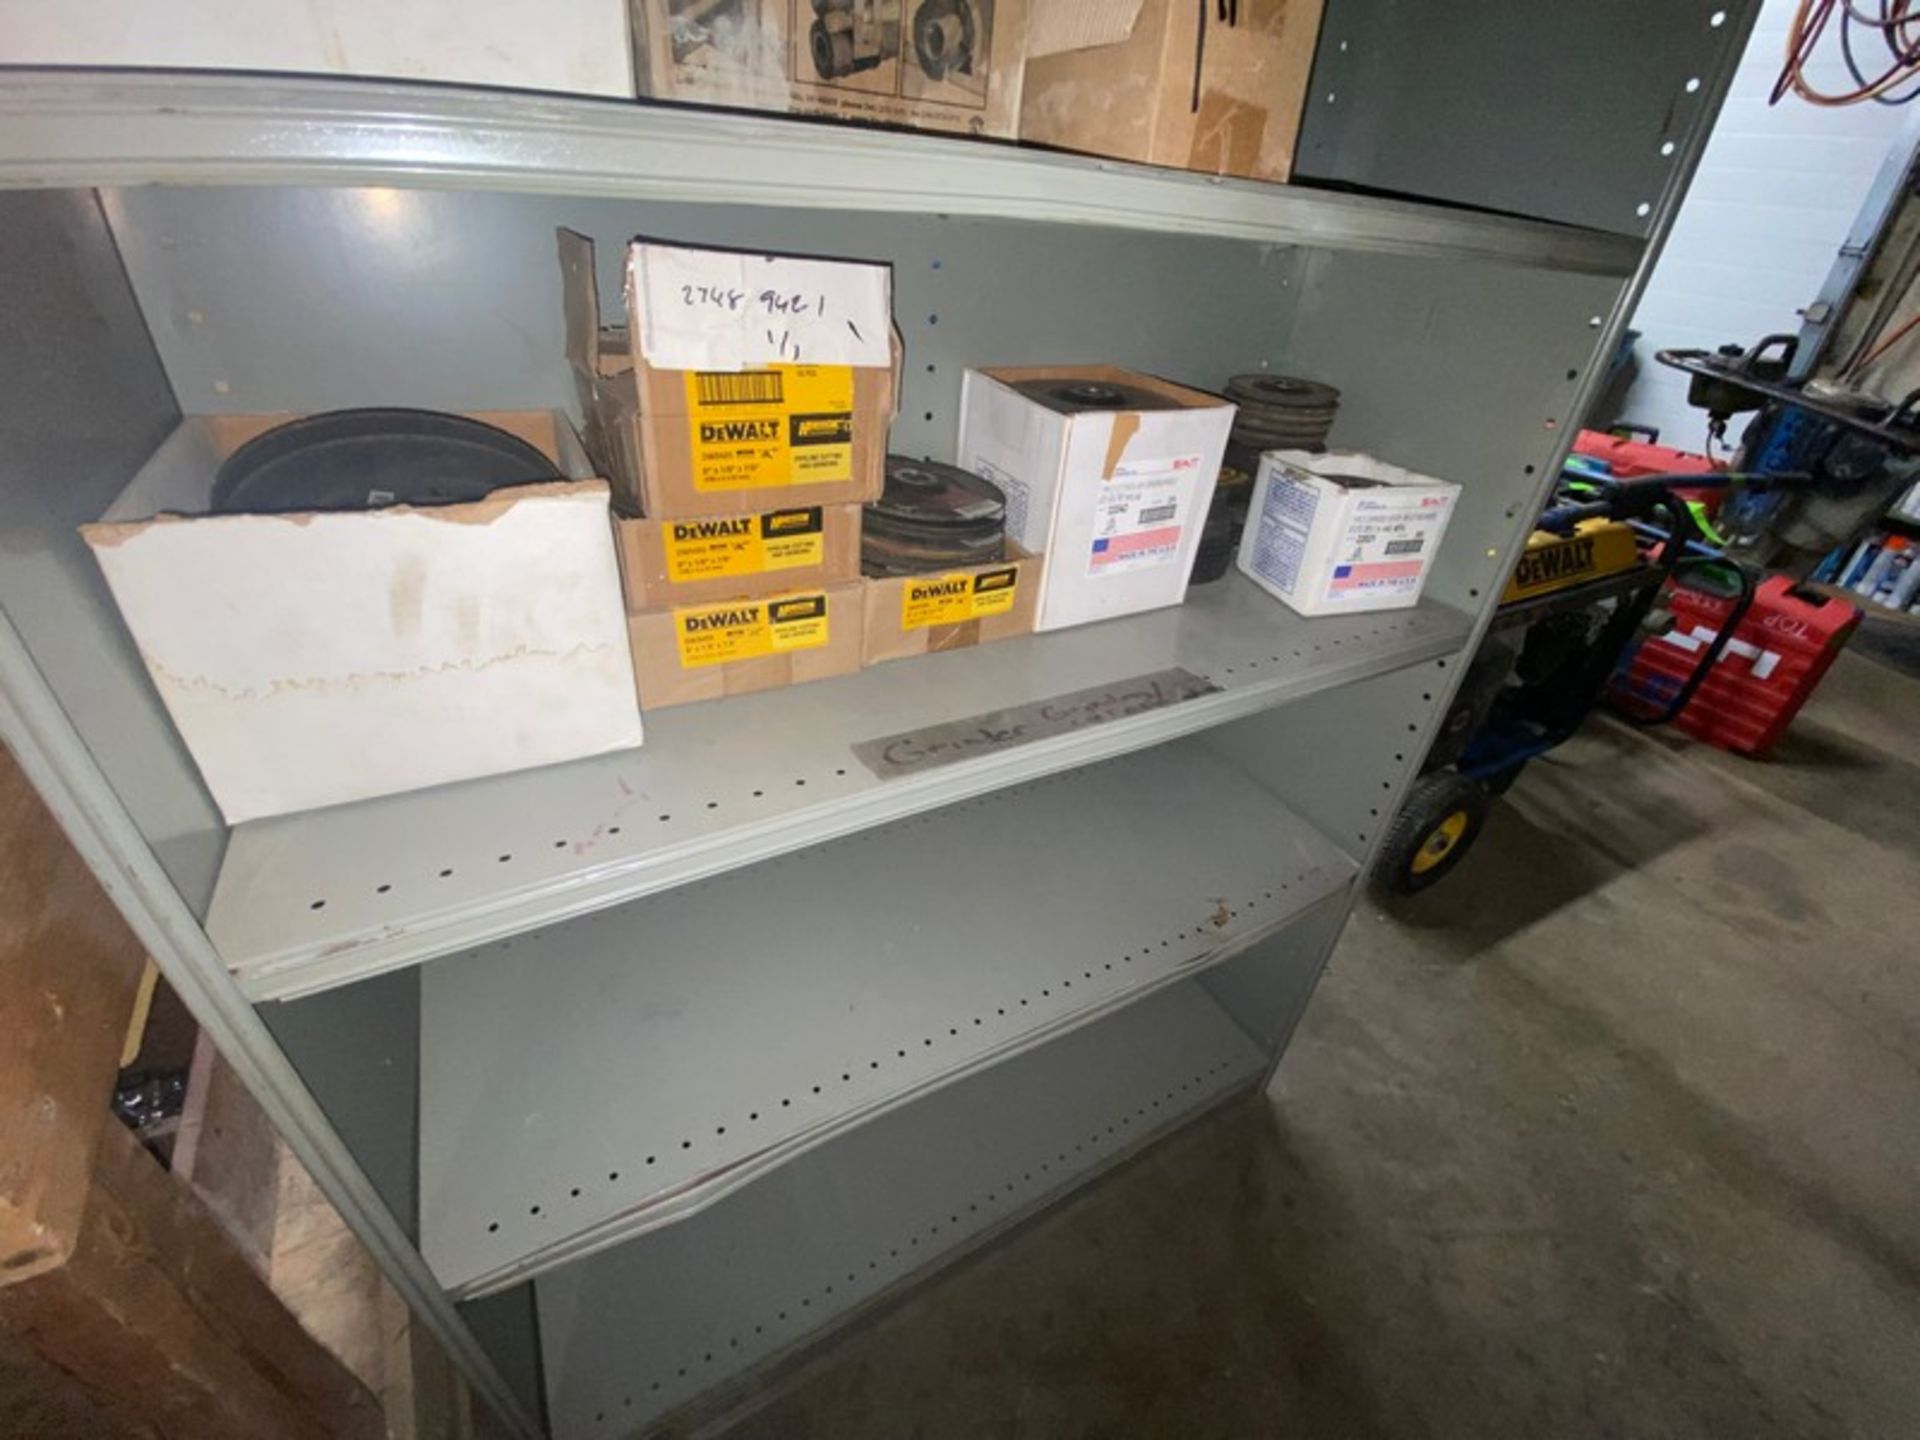 Shelf with Contents, Includes 2" Brushes, Boxes of DeWalt Pipeline Cutting & Grinding, with (2) - Image 7 of 10